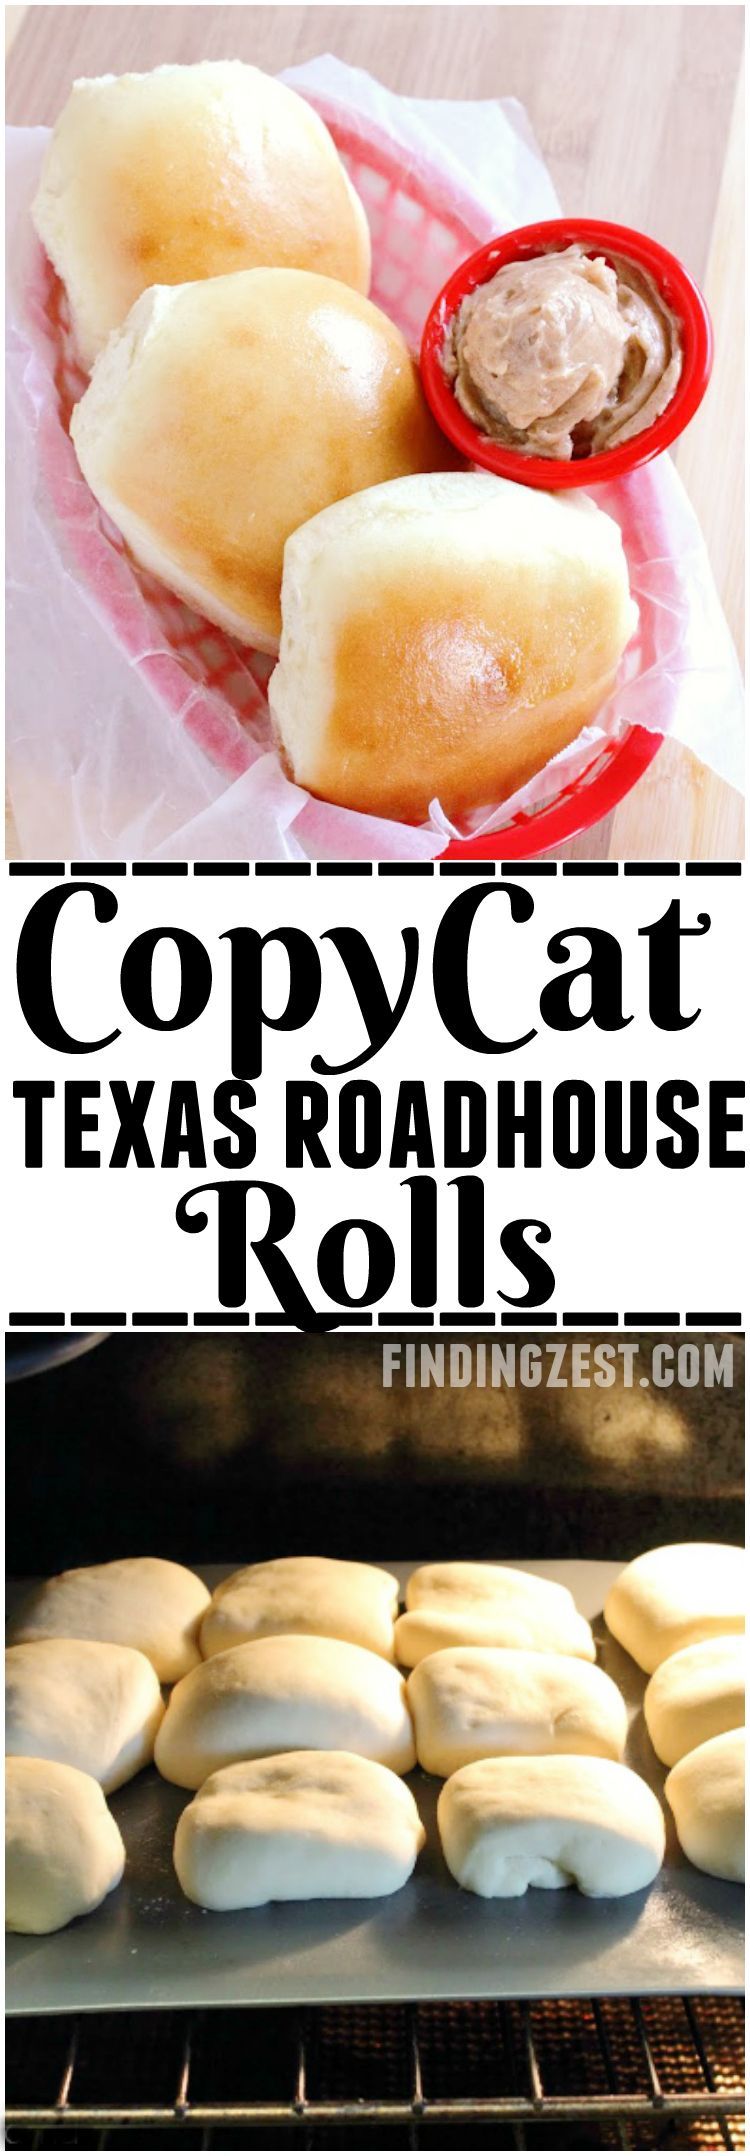 Copycat Texas Roadhouse Rolls with Cinnamon Butter -   17 delicious dinner recipes
 ideas